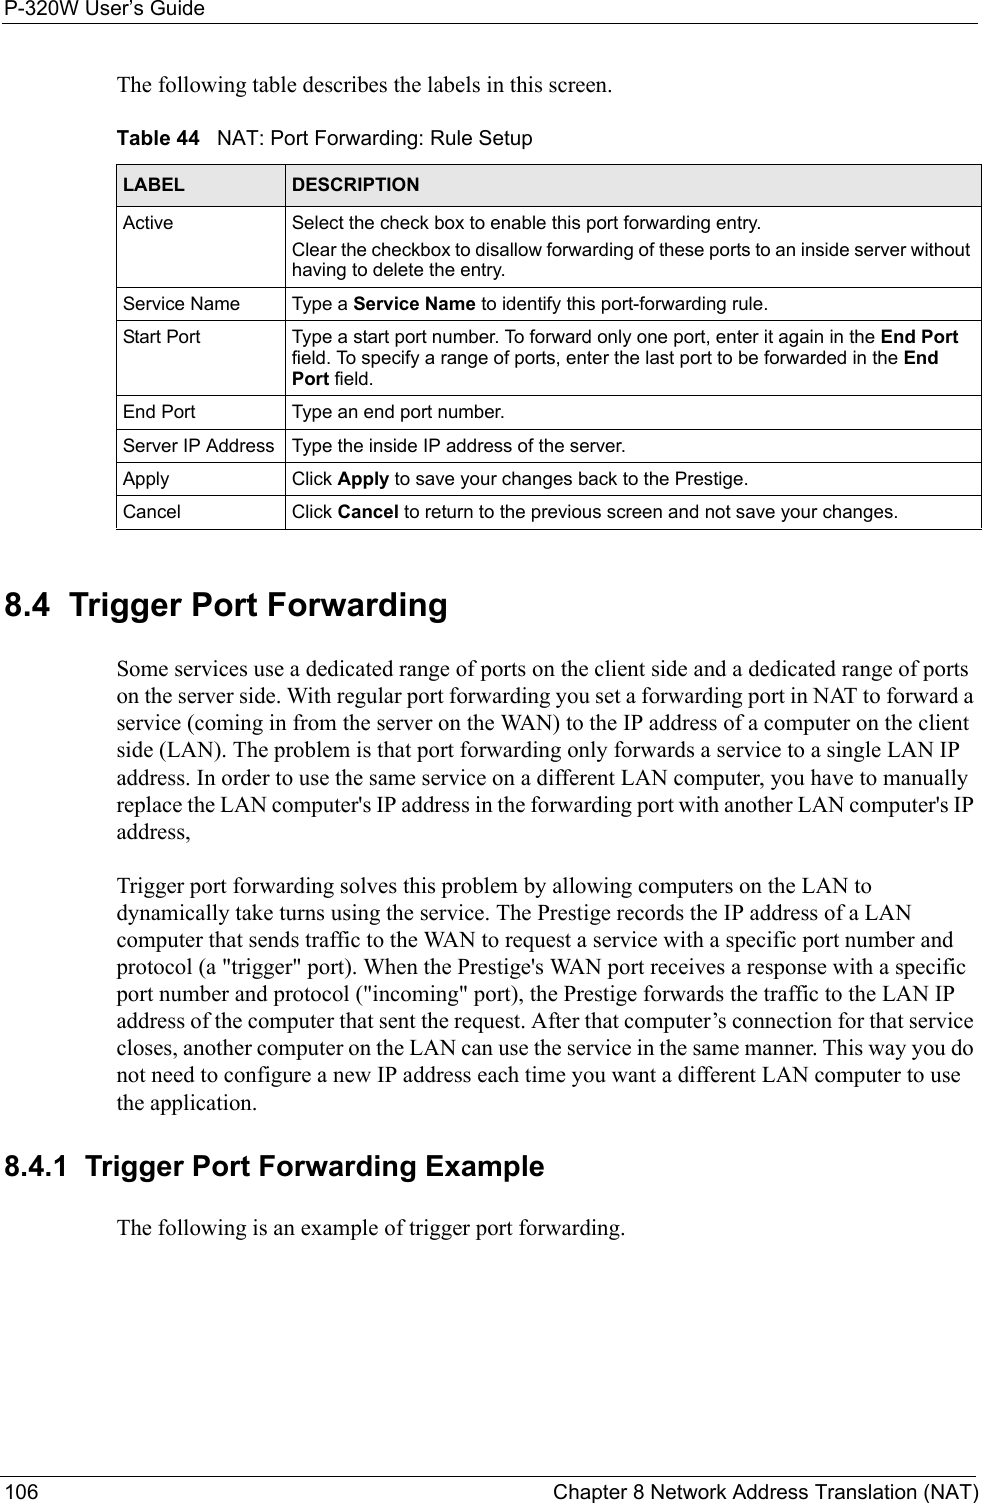 P-320W User’s Guide106  Chapter 8 Network Address Translation (NAT)The following table describes the labels in this screen.Table 44   NAT: Port Forwarding: Rule SetupLABEL DESCRIPTIONActive Select the check box to enable this port forwarding entry.Clear the checkbox to disallow forwarding of these ports to an inside server without having to delete the entry. Service Name Type a Service Name to identify this port-forwarding rule.Start Port Type a start port number. To forward only one port, enter it again in the End Port field. To specify a range of ports, enter the last port to be forwarded in the End Port field.End Port Type an end port number.Server IP Address Type the inside IP address of the server.Apply Click Apply to save your changes back to the Prestige.Cancel Click Cancel to return to the previous screen and not save your changes.8.4  Trigger Port ForwardingSome services use a dedicated range of ports on the client side and a dedicated range of ports on the server side. With regular port forwarding you set a forwarding port in NAT to forward a service (coming in from the server on the WAN) to the IP address of a computer on the client side (LAN). The problem is that port forwarding only forwards a service to a single LAN IP address. In order to use the same service on a different LAN computer, you have to manually replace the LAN computer&apos;s IP address in the forwarding port with another LAN computer&apos;s IP address, Trigger port forwarding solves this problem by allowing computers on the LAN to dynamically take turns using the service. The Prestige records the IP address of a LAN computer that sends traffic to the WAN to request a service with a specific port number and protocol (a &quot;trigger&quot; port). When the Prestige&apos;s WAN port receives a response with a specific port number and protocol (&quot;incoming&quot; port), the Prestige forwards the traffic to the LAN IP address of the computer that sent the request. After that computer’s connection for that service closes, another computer on the LAN can use the service in the same manner. This way you do not need to configure a new IP address each time you want a different LAN computer to use the application.8.4.1  Trigger Port Forwarding ExampleThe following is an example of trigger port forwarding.